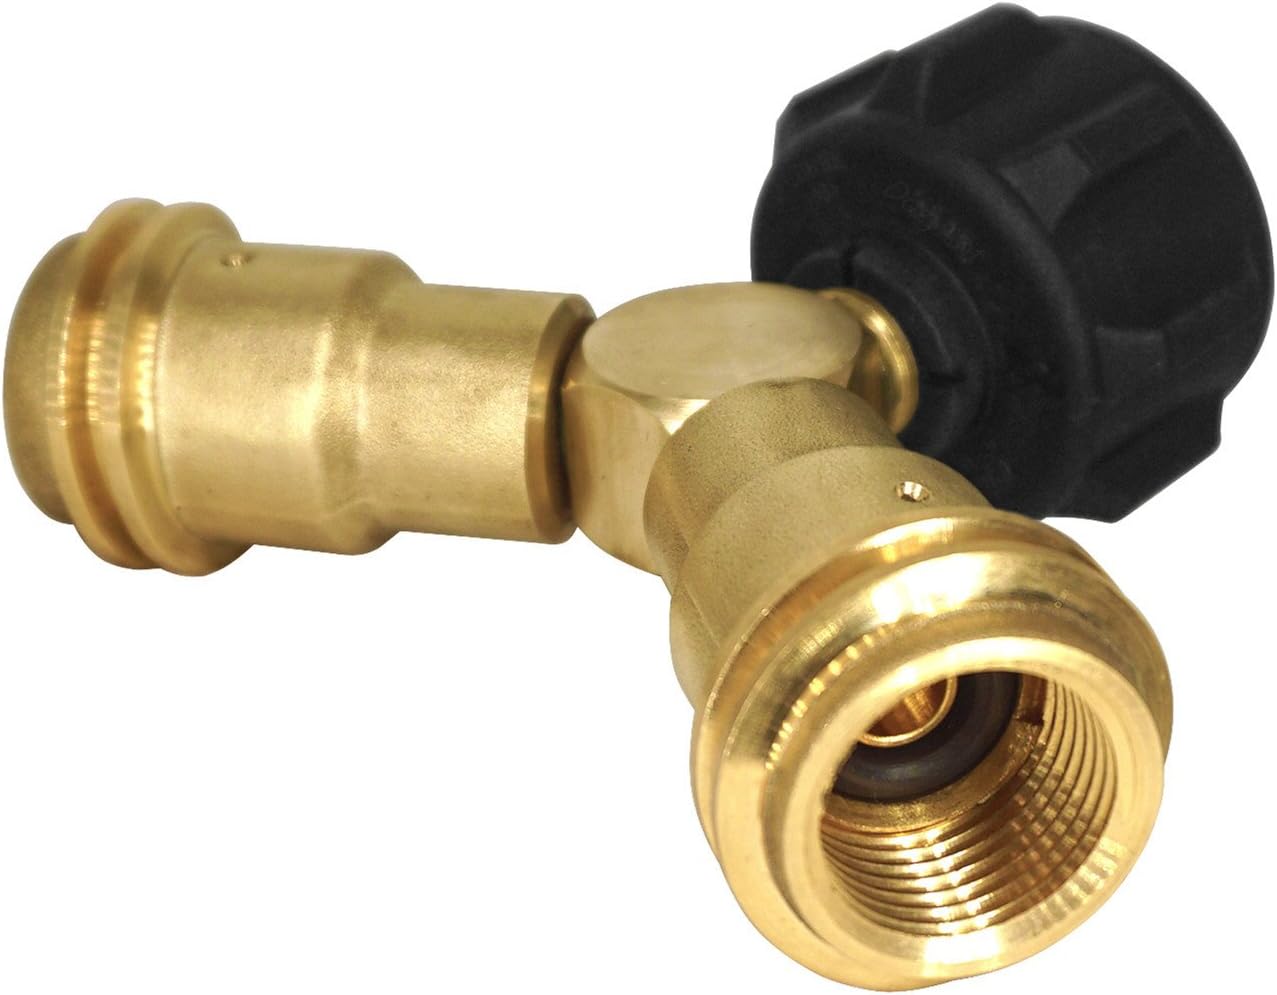 A brass hose connector with a black nozzle and a Coyote 2-way propane splitter for tanks.